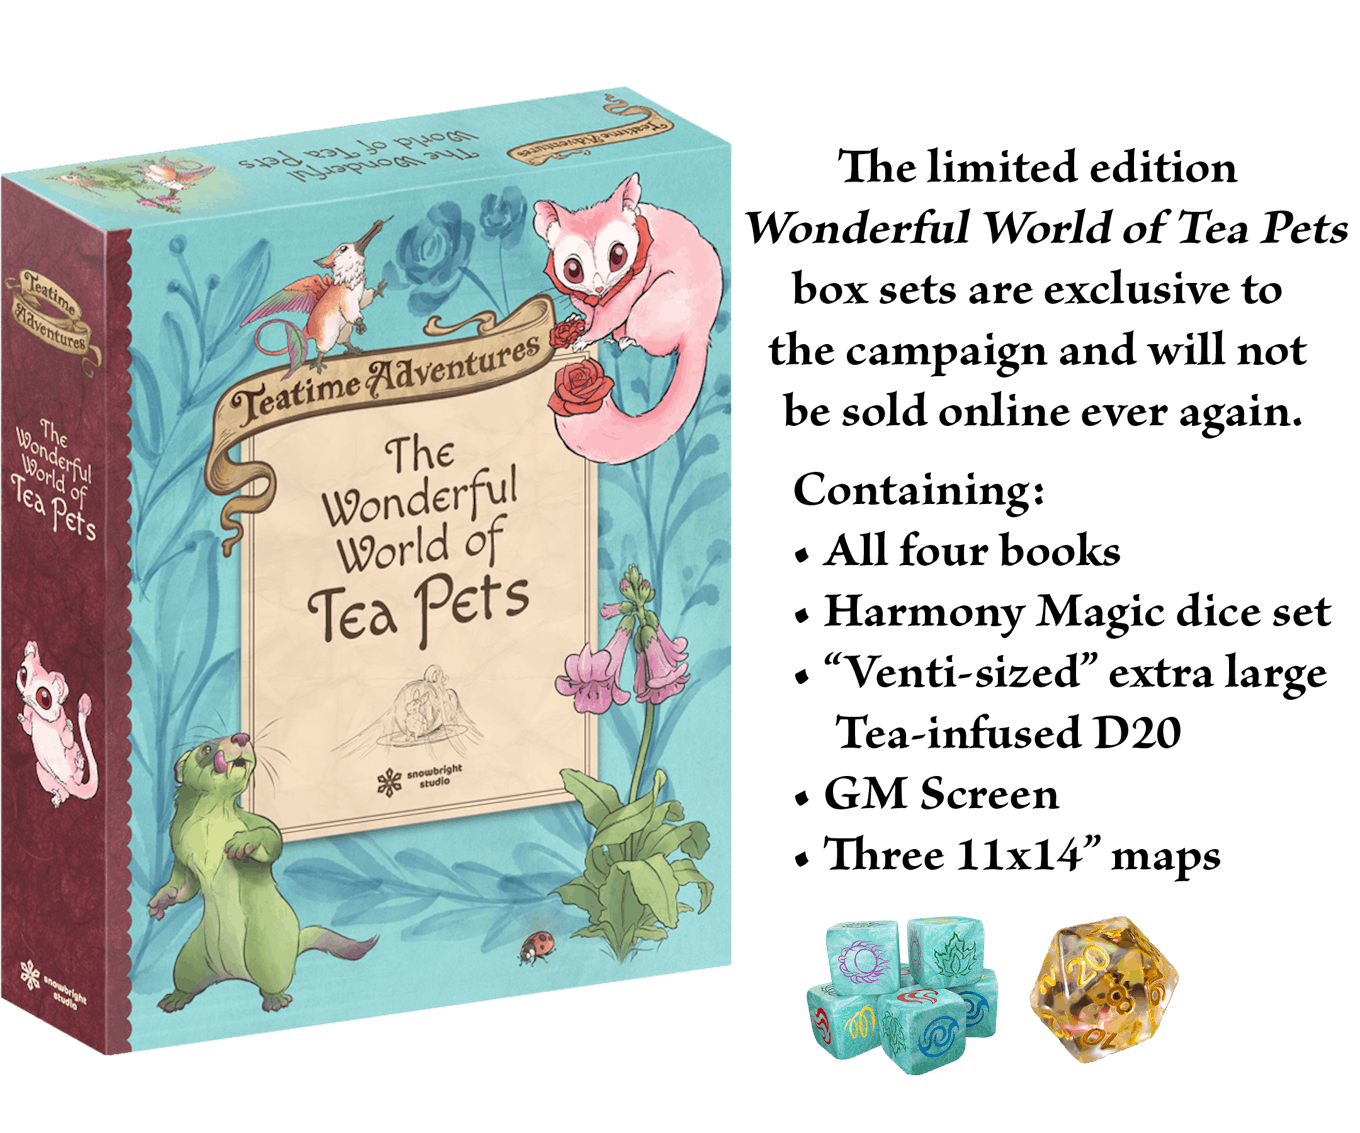 The limited edition Wonderful World of Tea Pets box sets are exclusive to the campaign and will not be sold online ever again. Containing: All four books, Harmony Magic dice set, "Venti-sized" extra large Tea-infused D20, GM Screen, Three 11x14" maps.